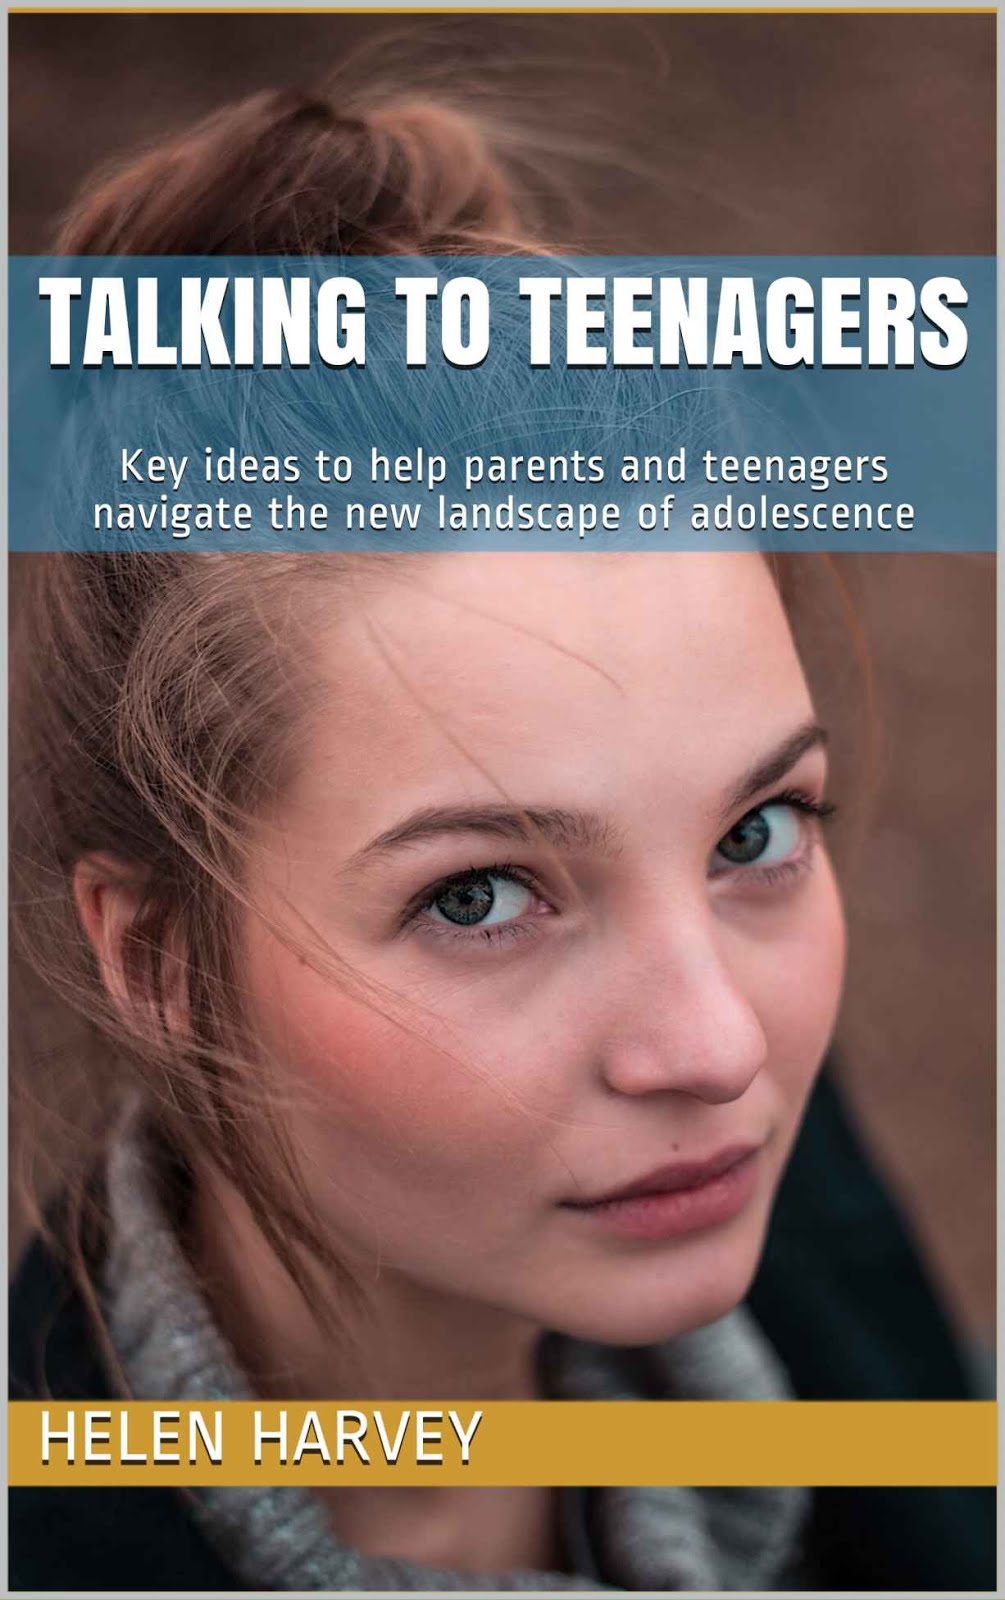 Talking to Teenagers book